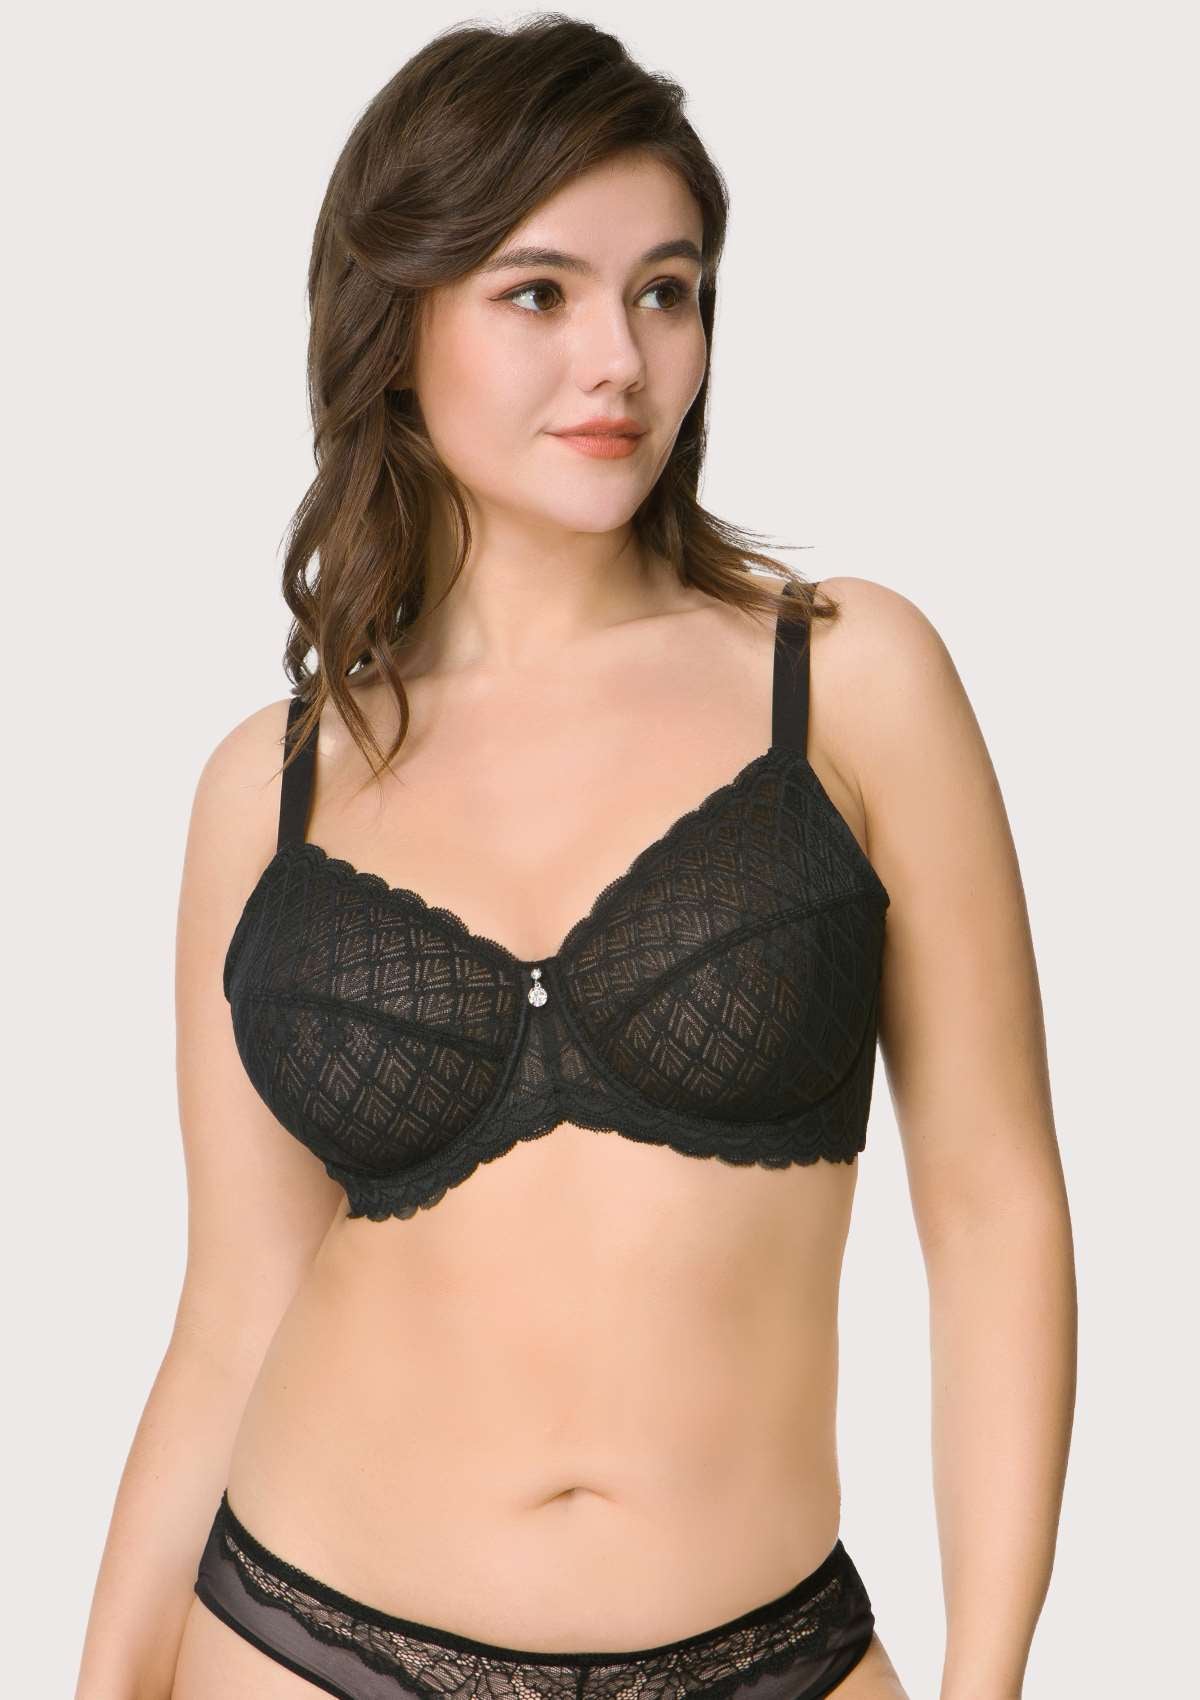 HSIA Plaid Full-Coverage Bra: Soft Bra With Thick Straps - Coral / 38 / D